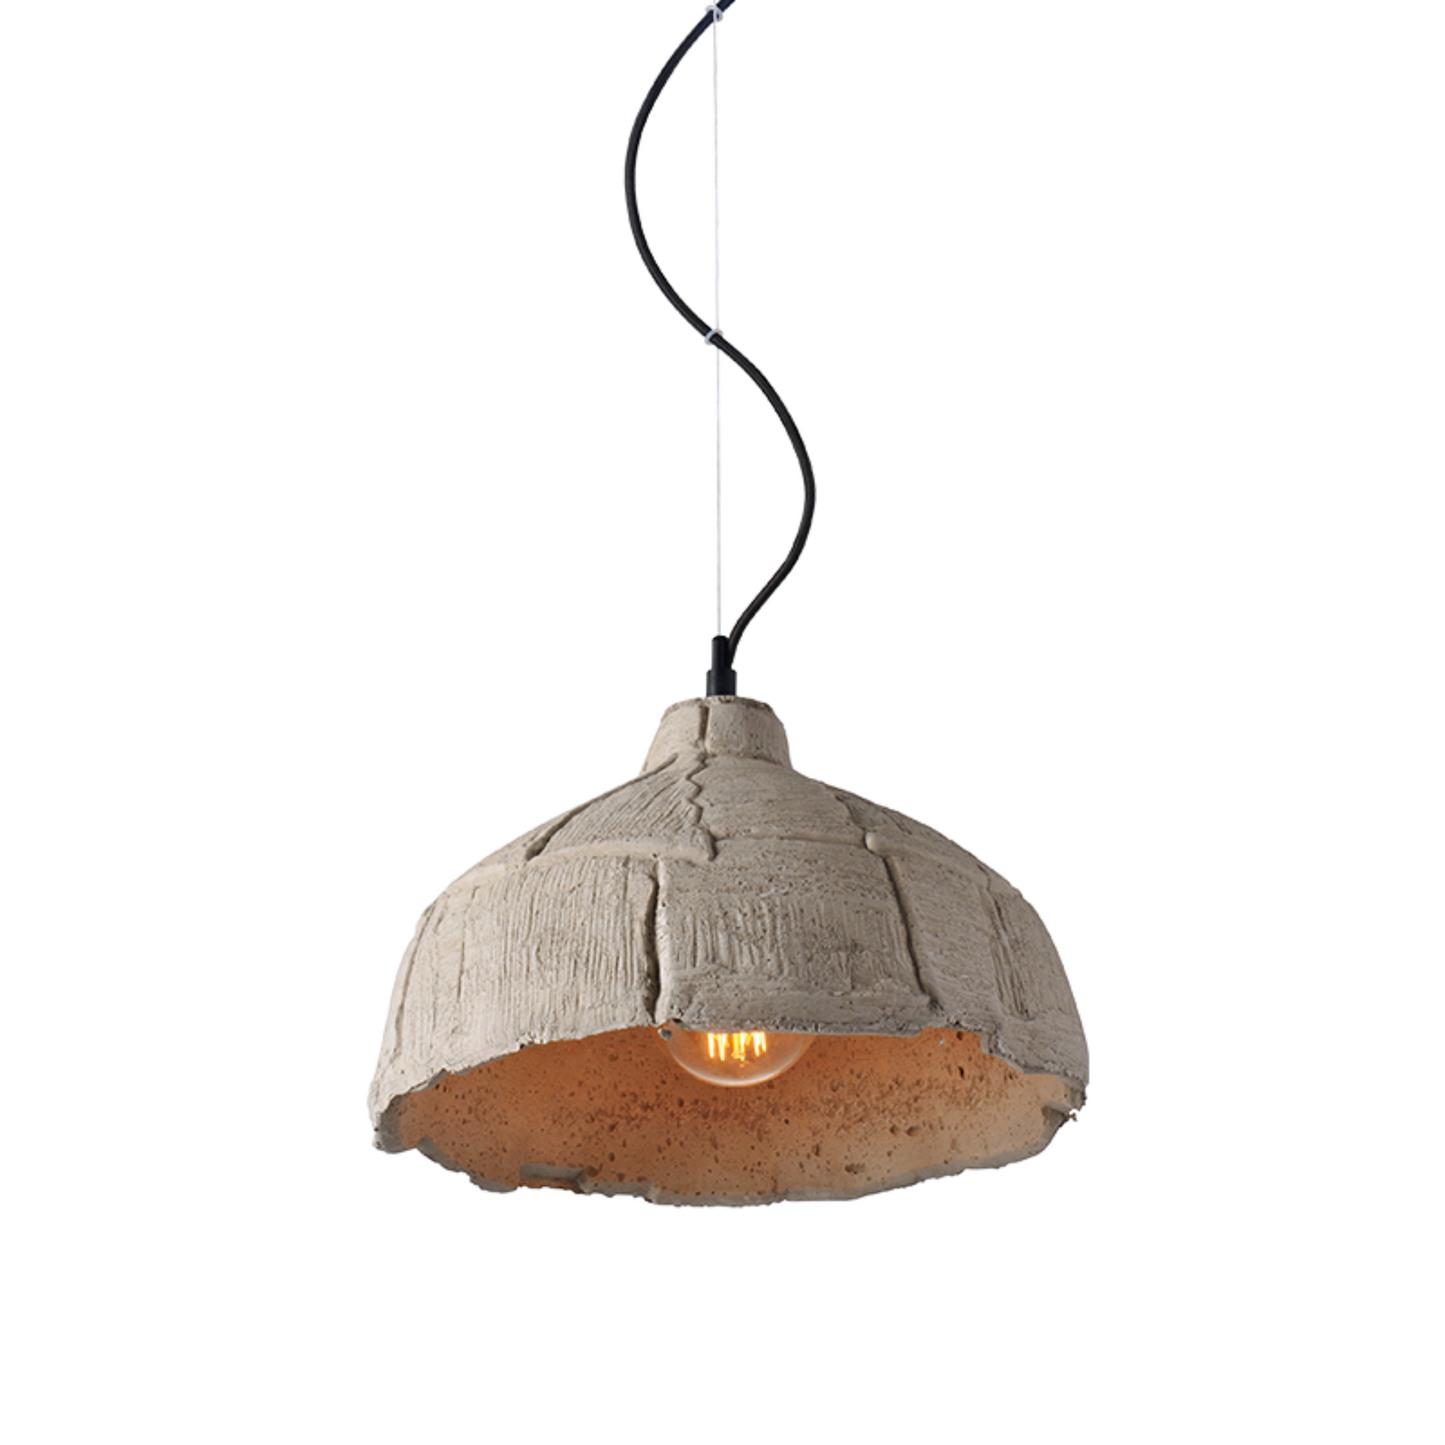 Lampshade Backlight Pendant Light by Gloss (6019)